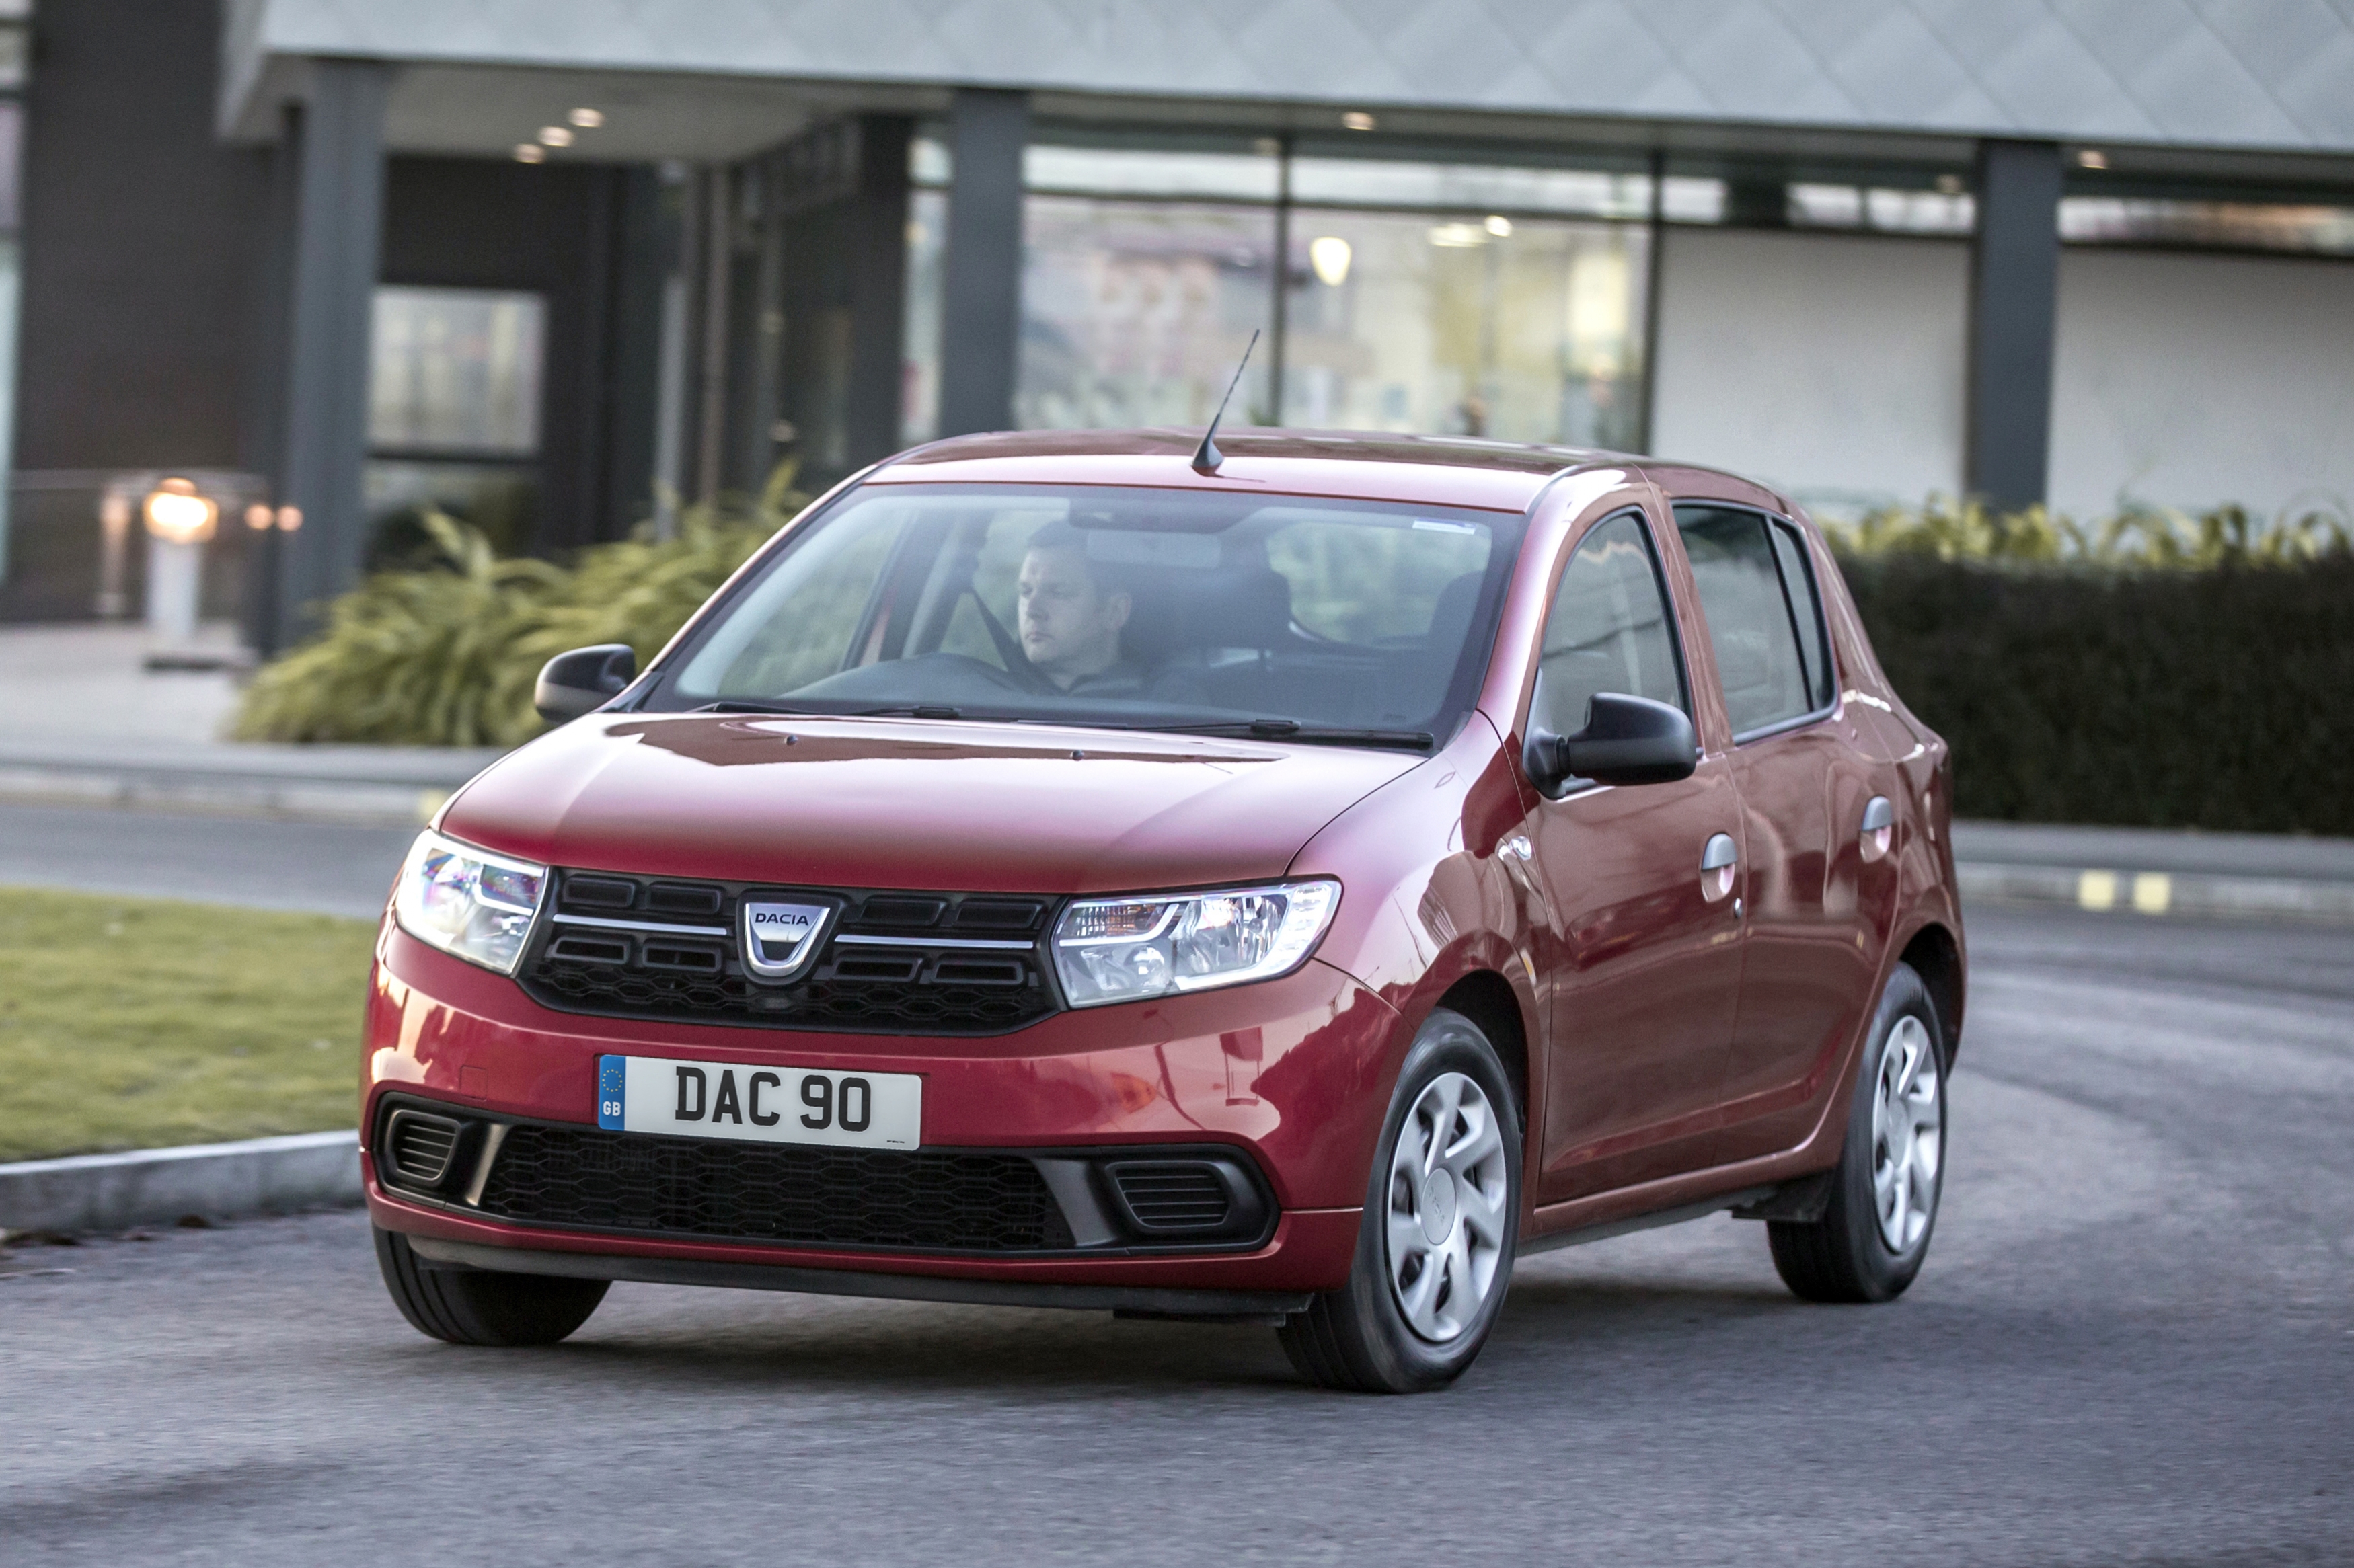 Dacia Sandero Starting Price Bumped Up By 1000 To 6995 Autocar